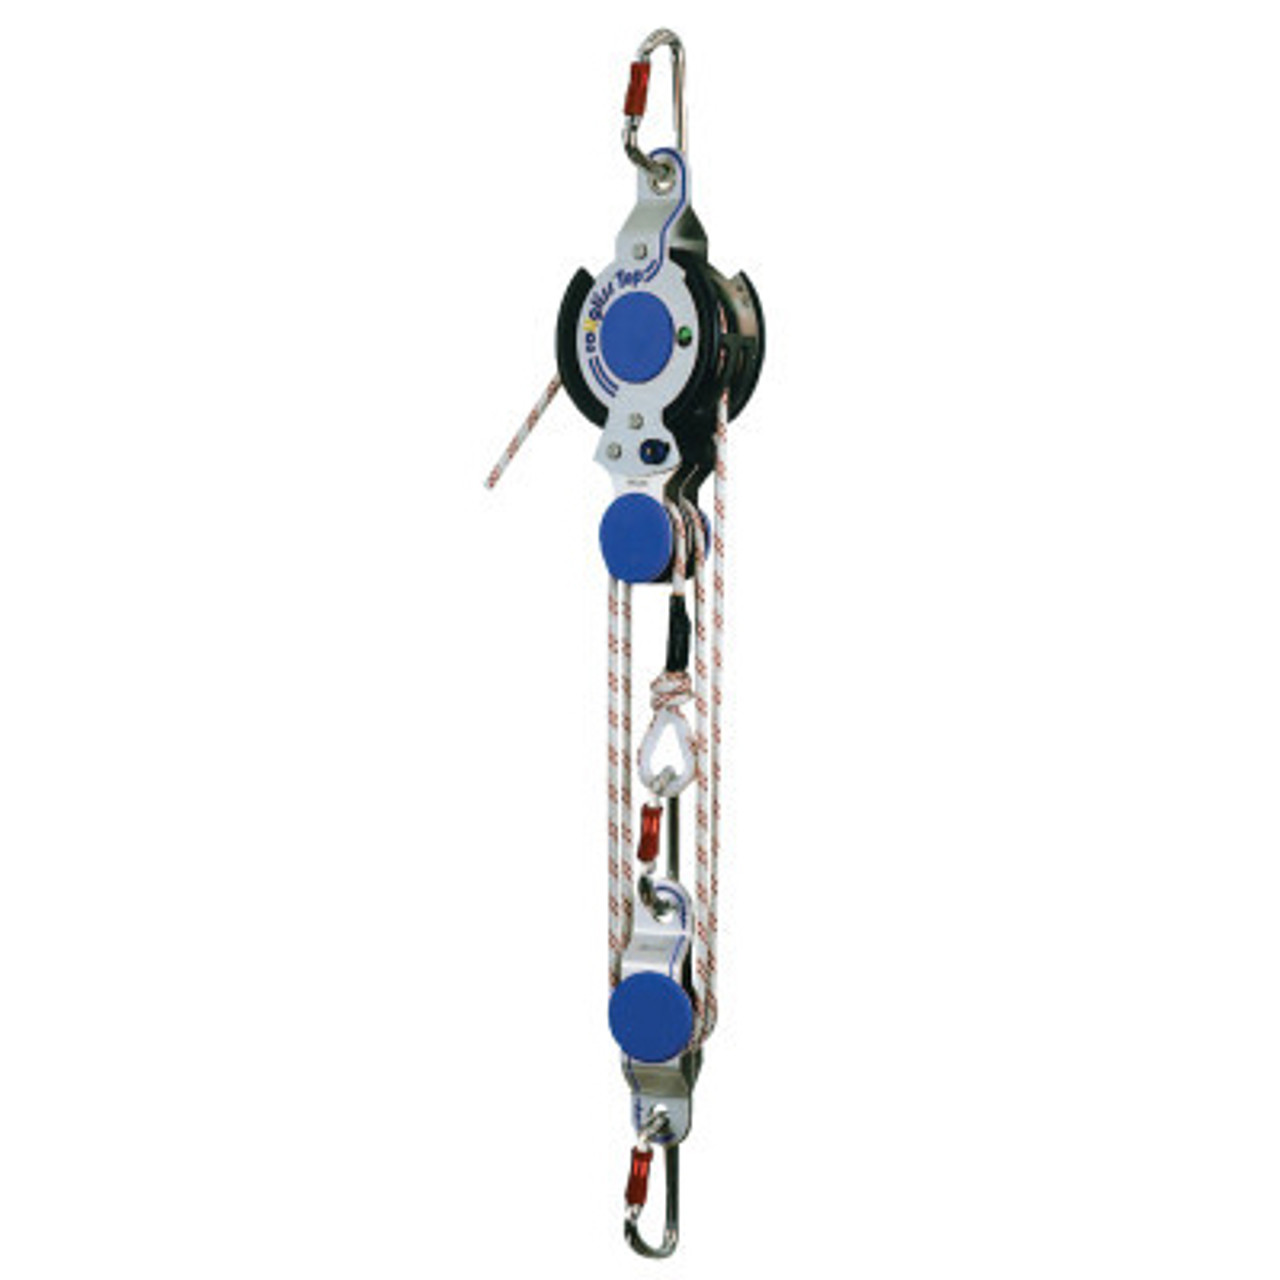 Capital Safety Rollgliss Rope Rescue Systems, 50 ft, Anchor Sling